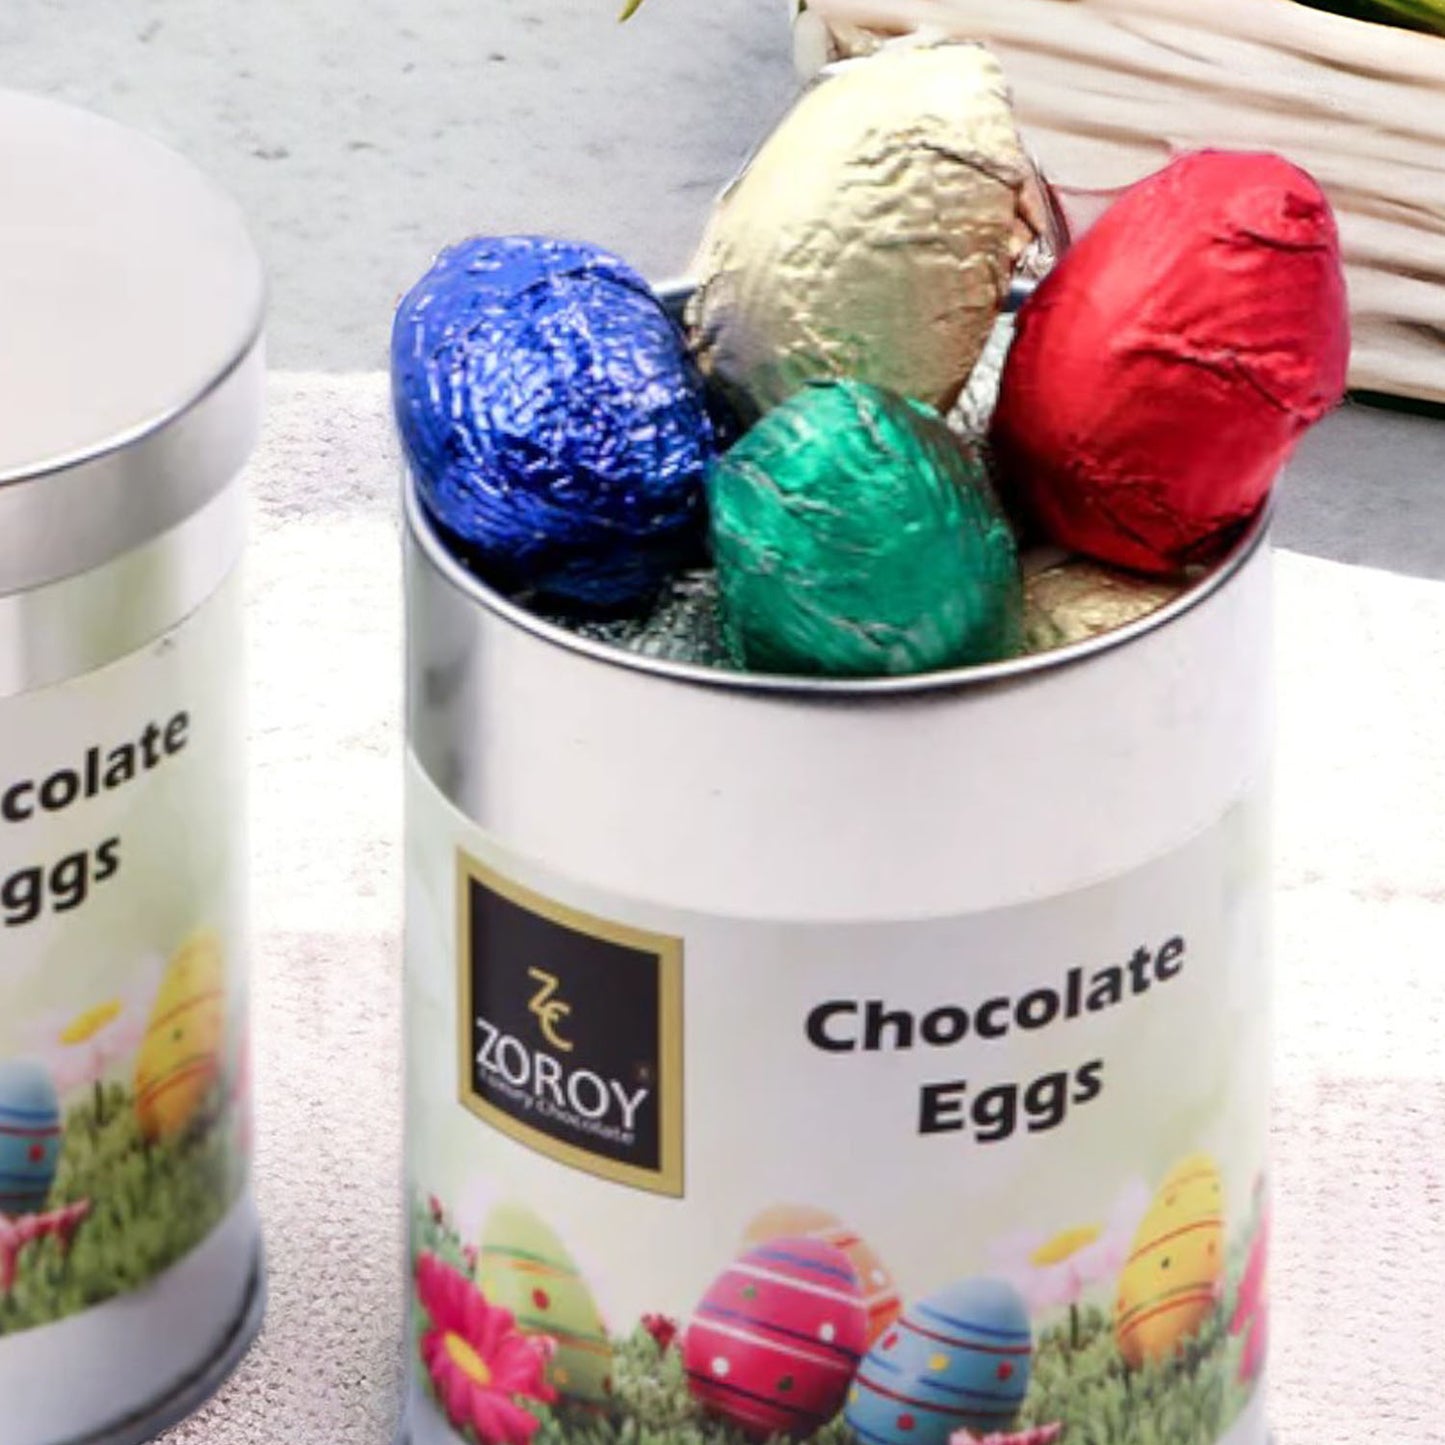 ZOROY Easter Egg's Chocolate with Reusable Tin Gift Pack - 132 Gms